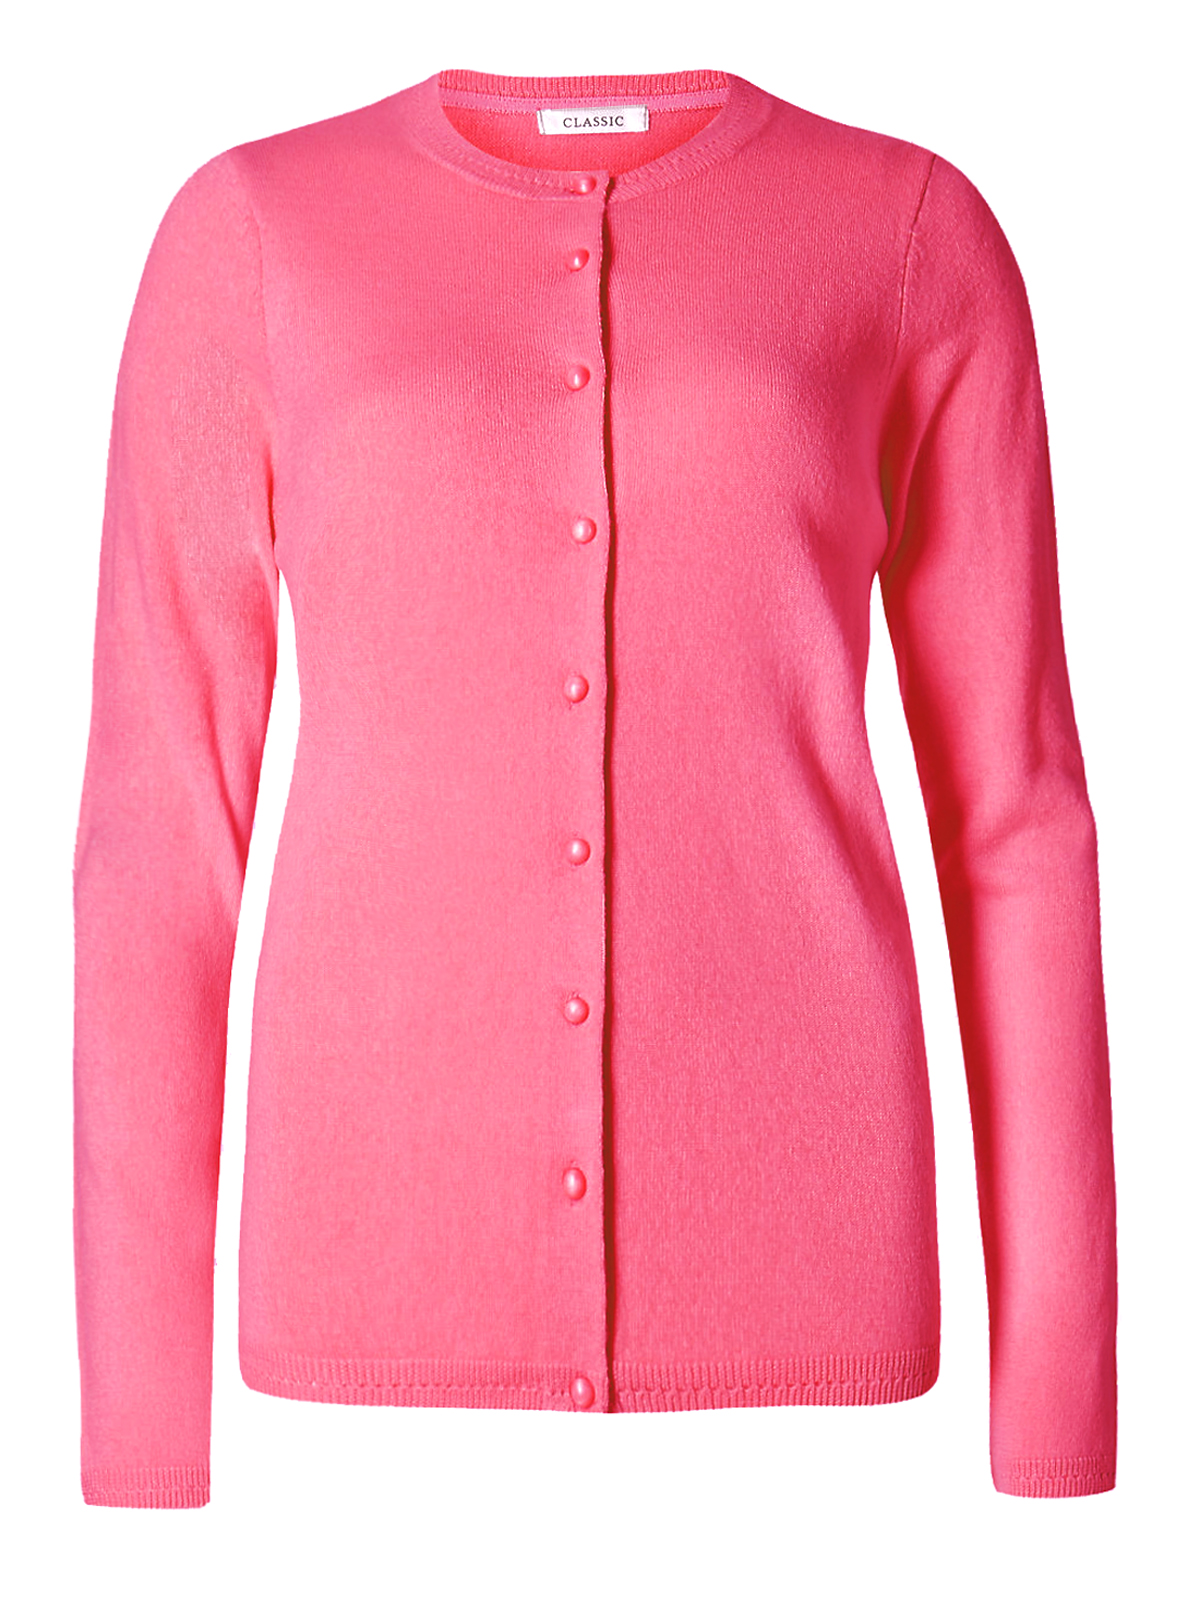 Marks and Spencer - - M&5 BRIGHT-ROSE Cashmilon Pearl Effect Button ...